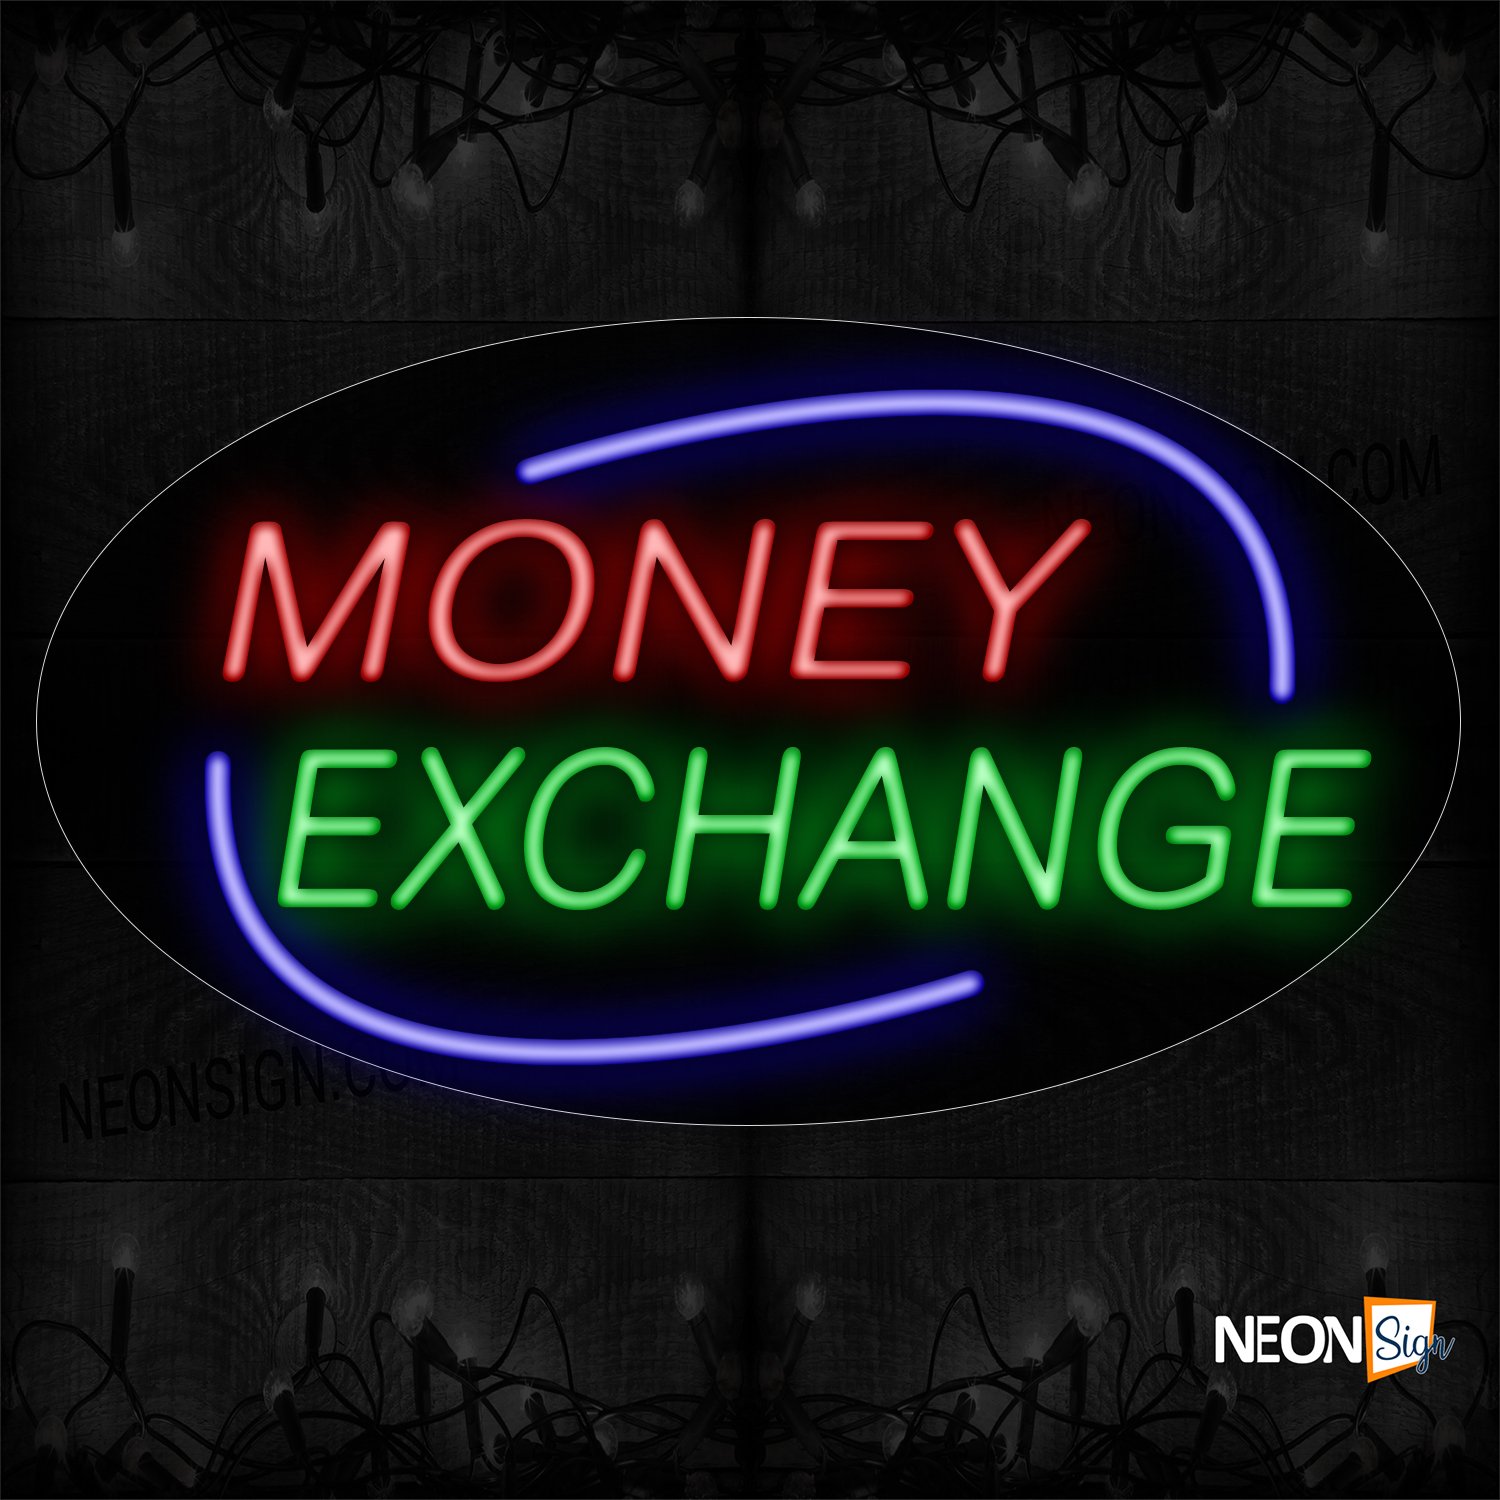 Image of 14599 Money Exchange With Blue Arc Border Neon Sign _17x30 Contoured Black Backing